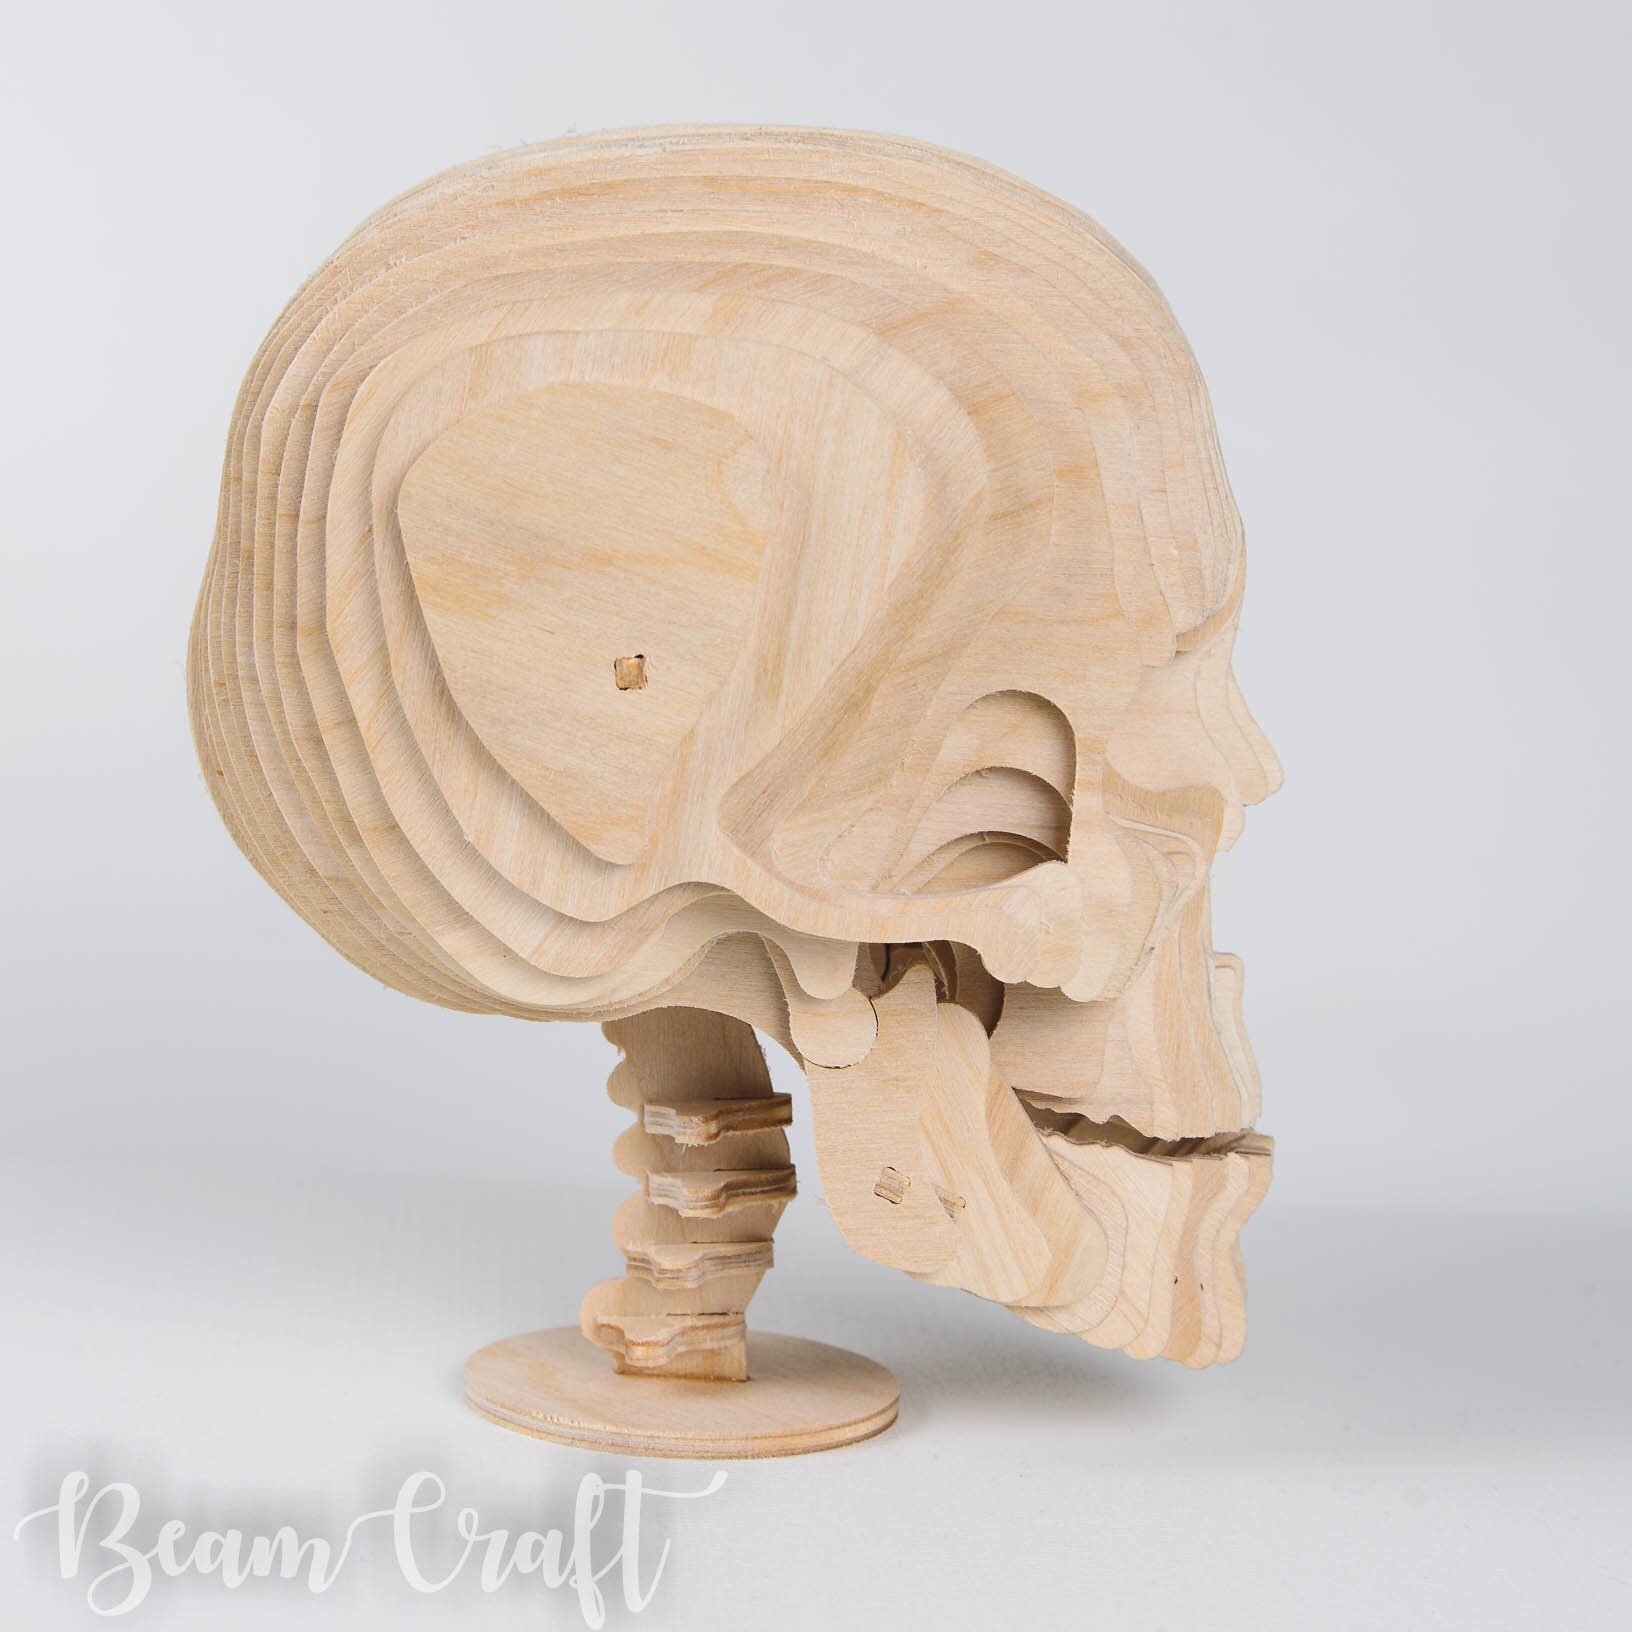 Skull model human wooden kit 3d woodcraft kid adult gift puzzle 